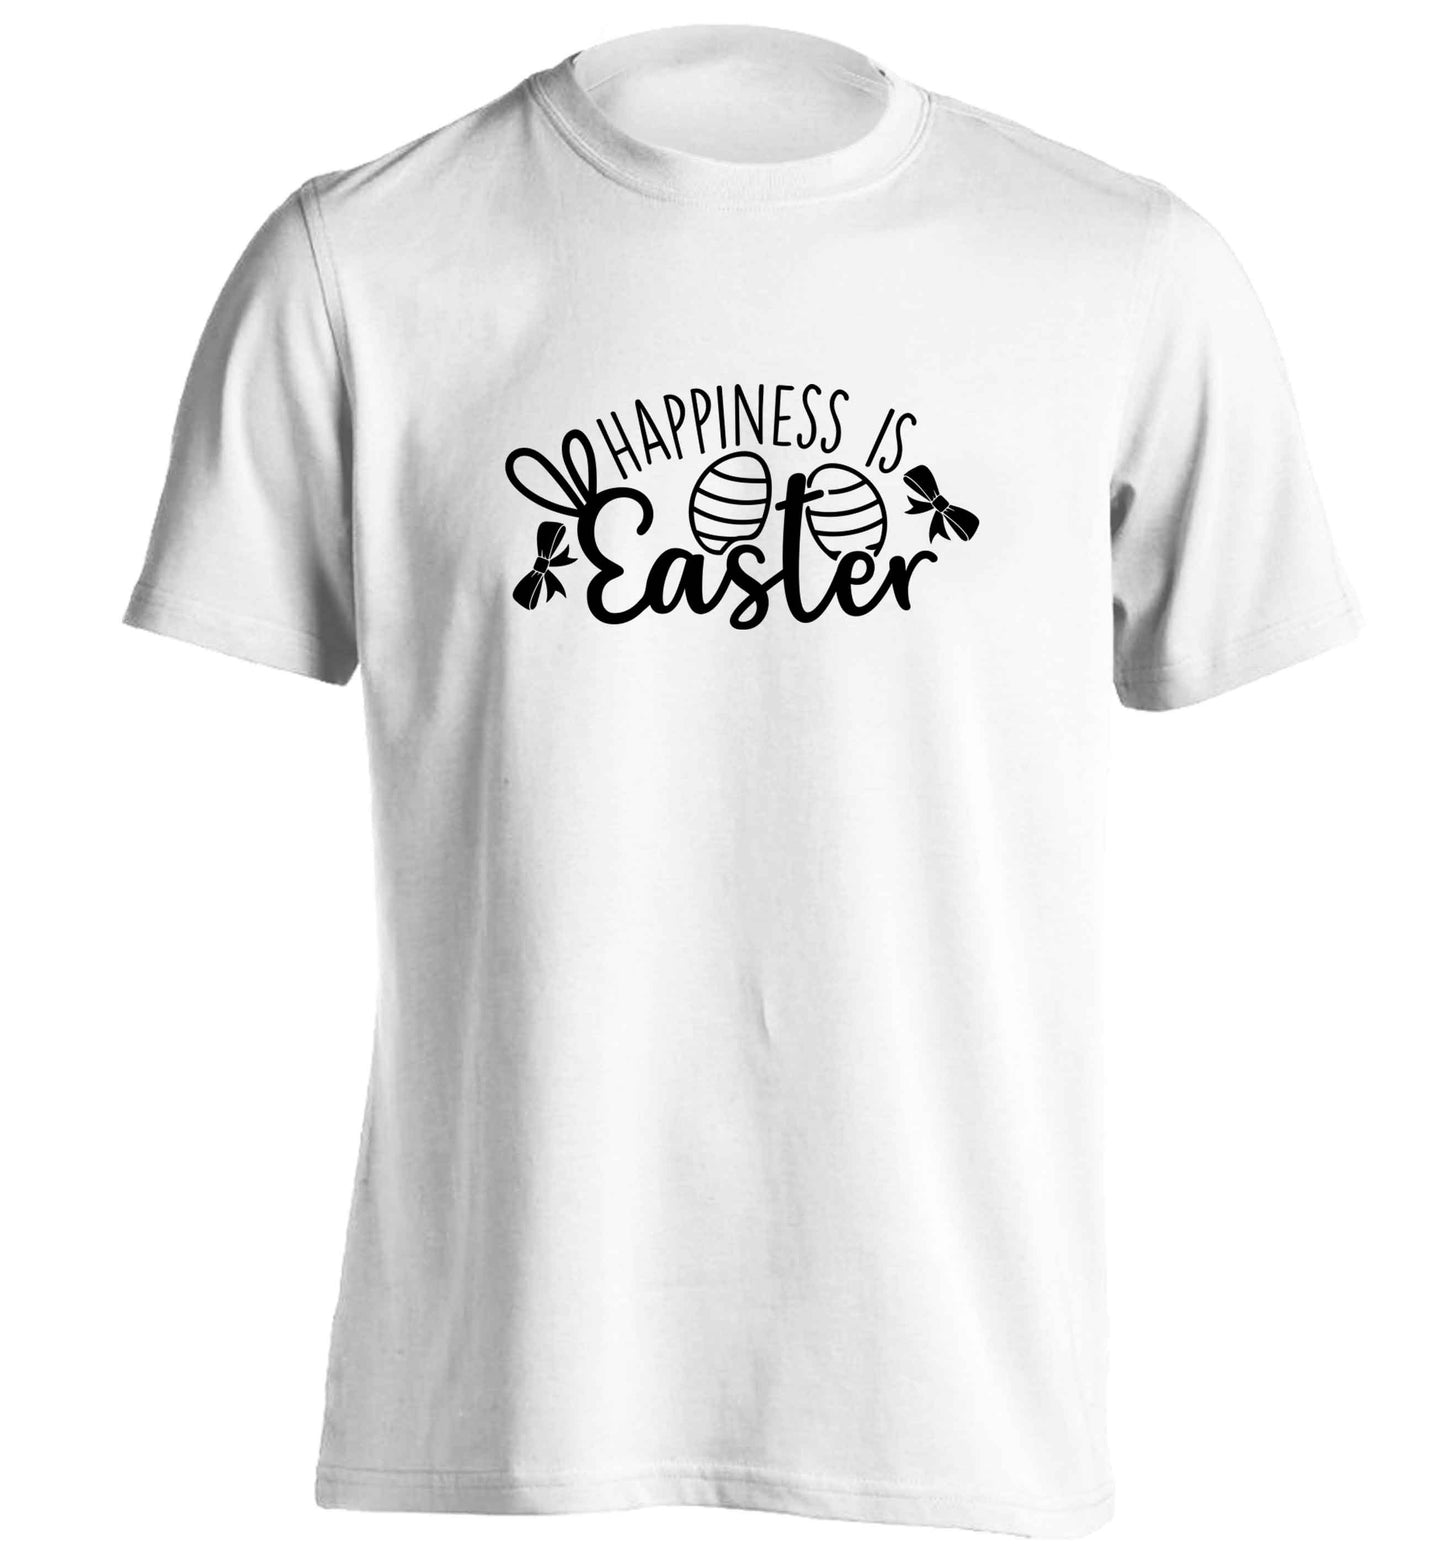 Happiness is easter adults unisex white Tshirt 2XL